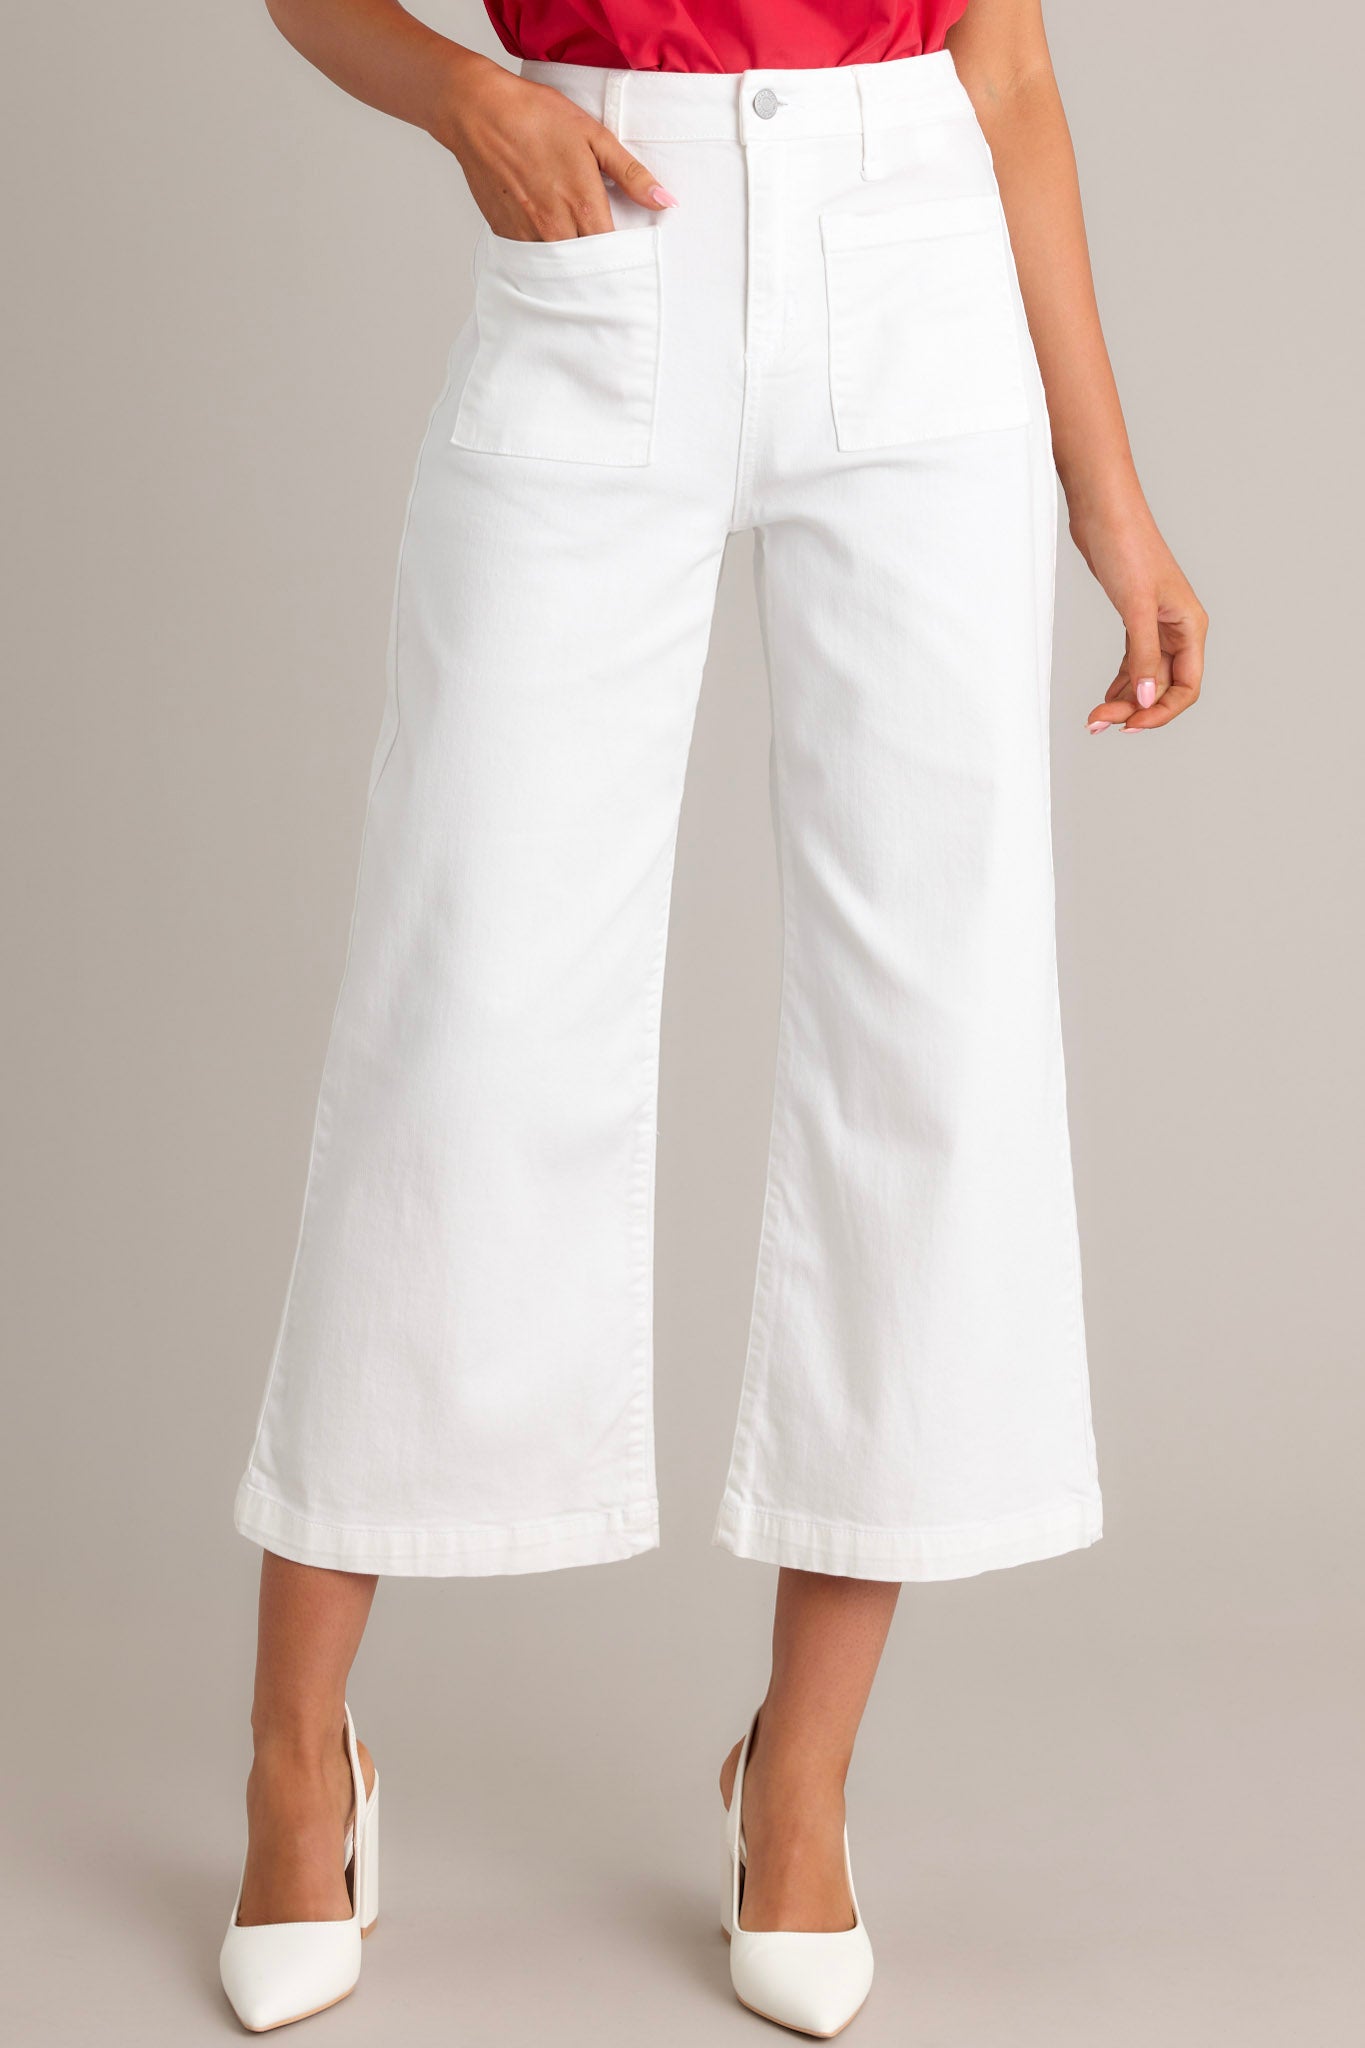 Front view of white jeans featuring a high waisted design, a button & zipper closure, belt loops, functional front & back pockets, a cropped hemline, and a flared leg.